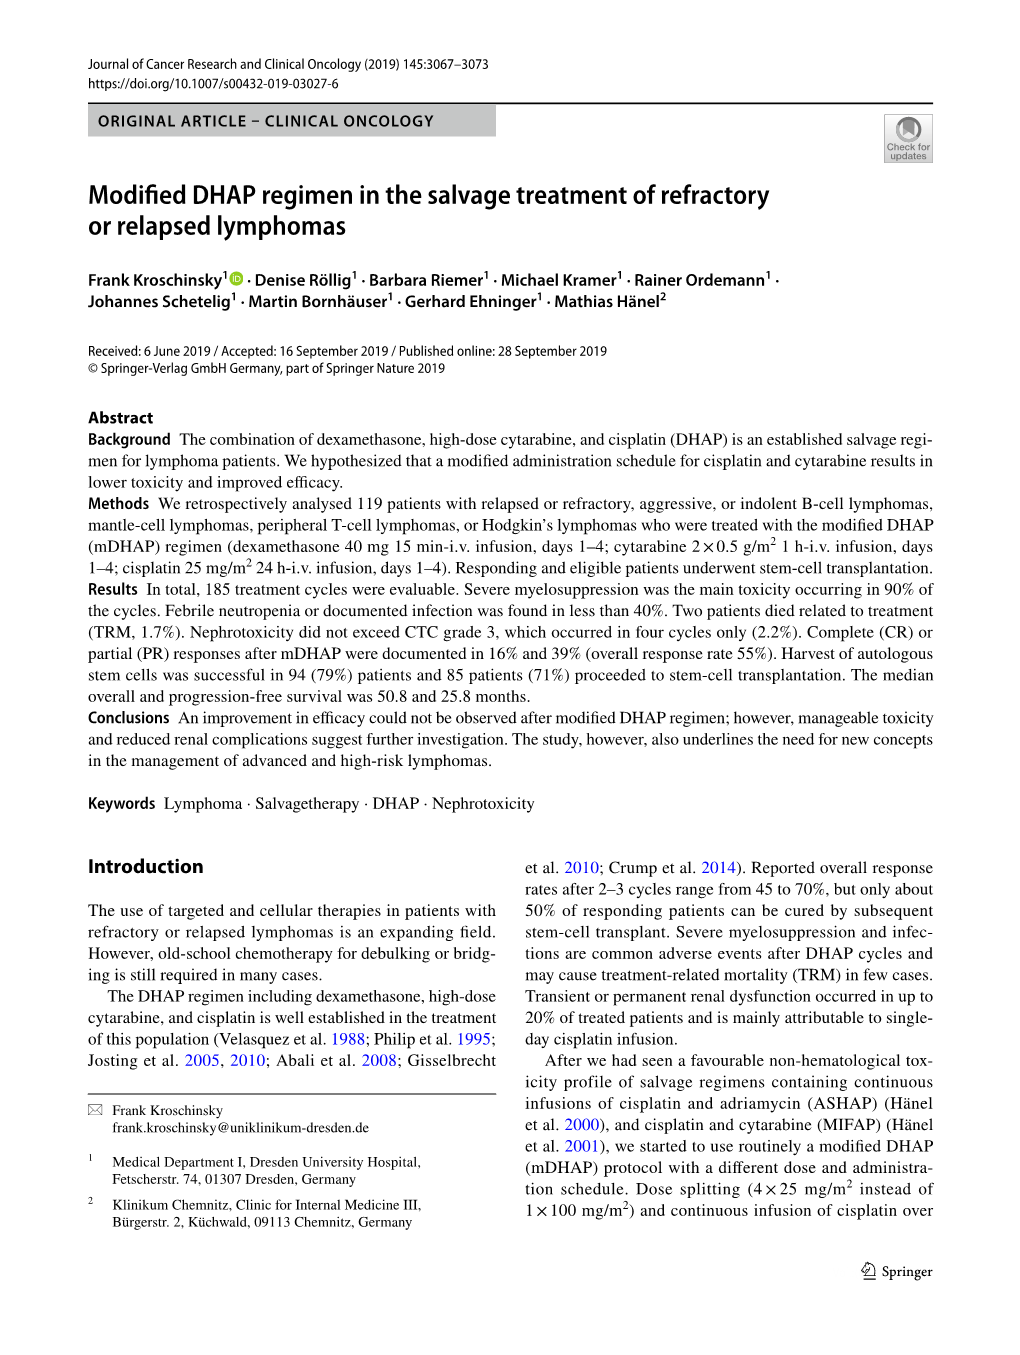 Modified DHAP Regimen in the Salvage Treatment of Refractory Or